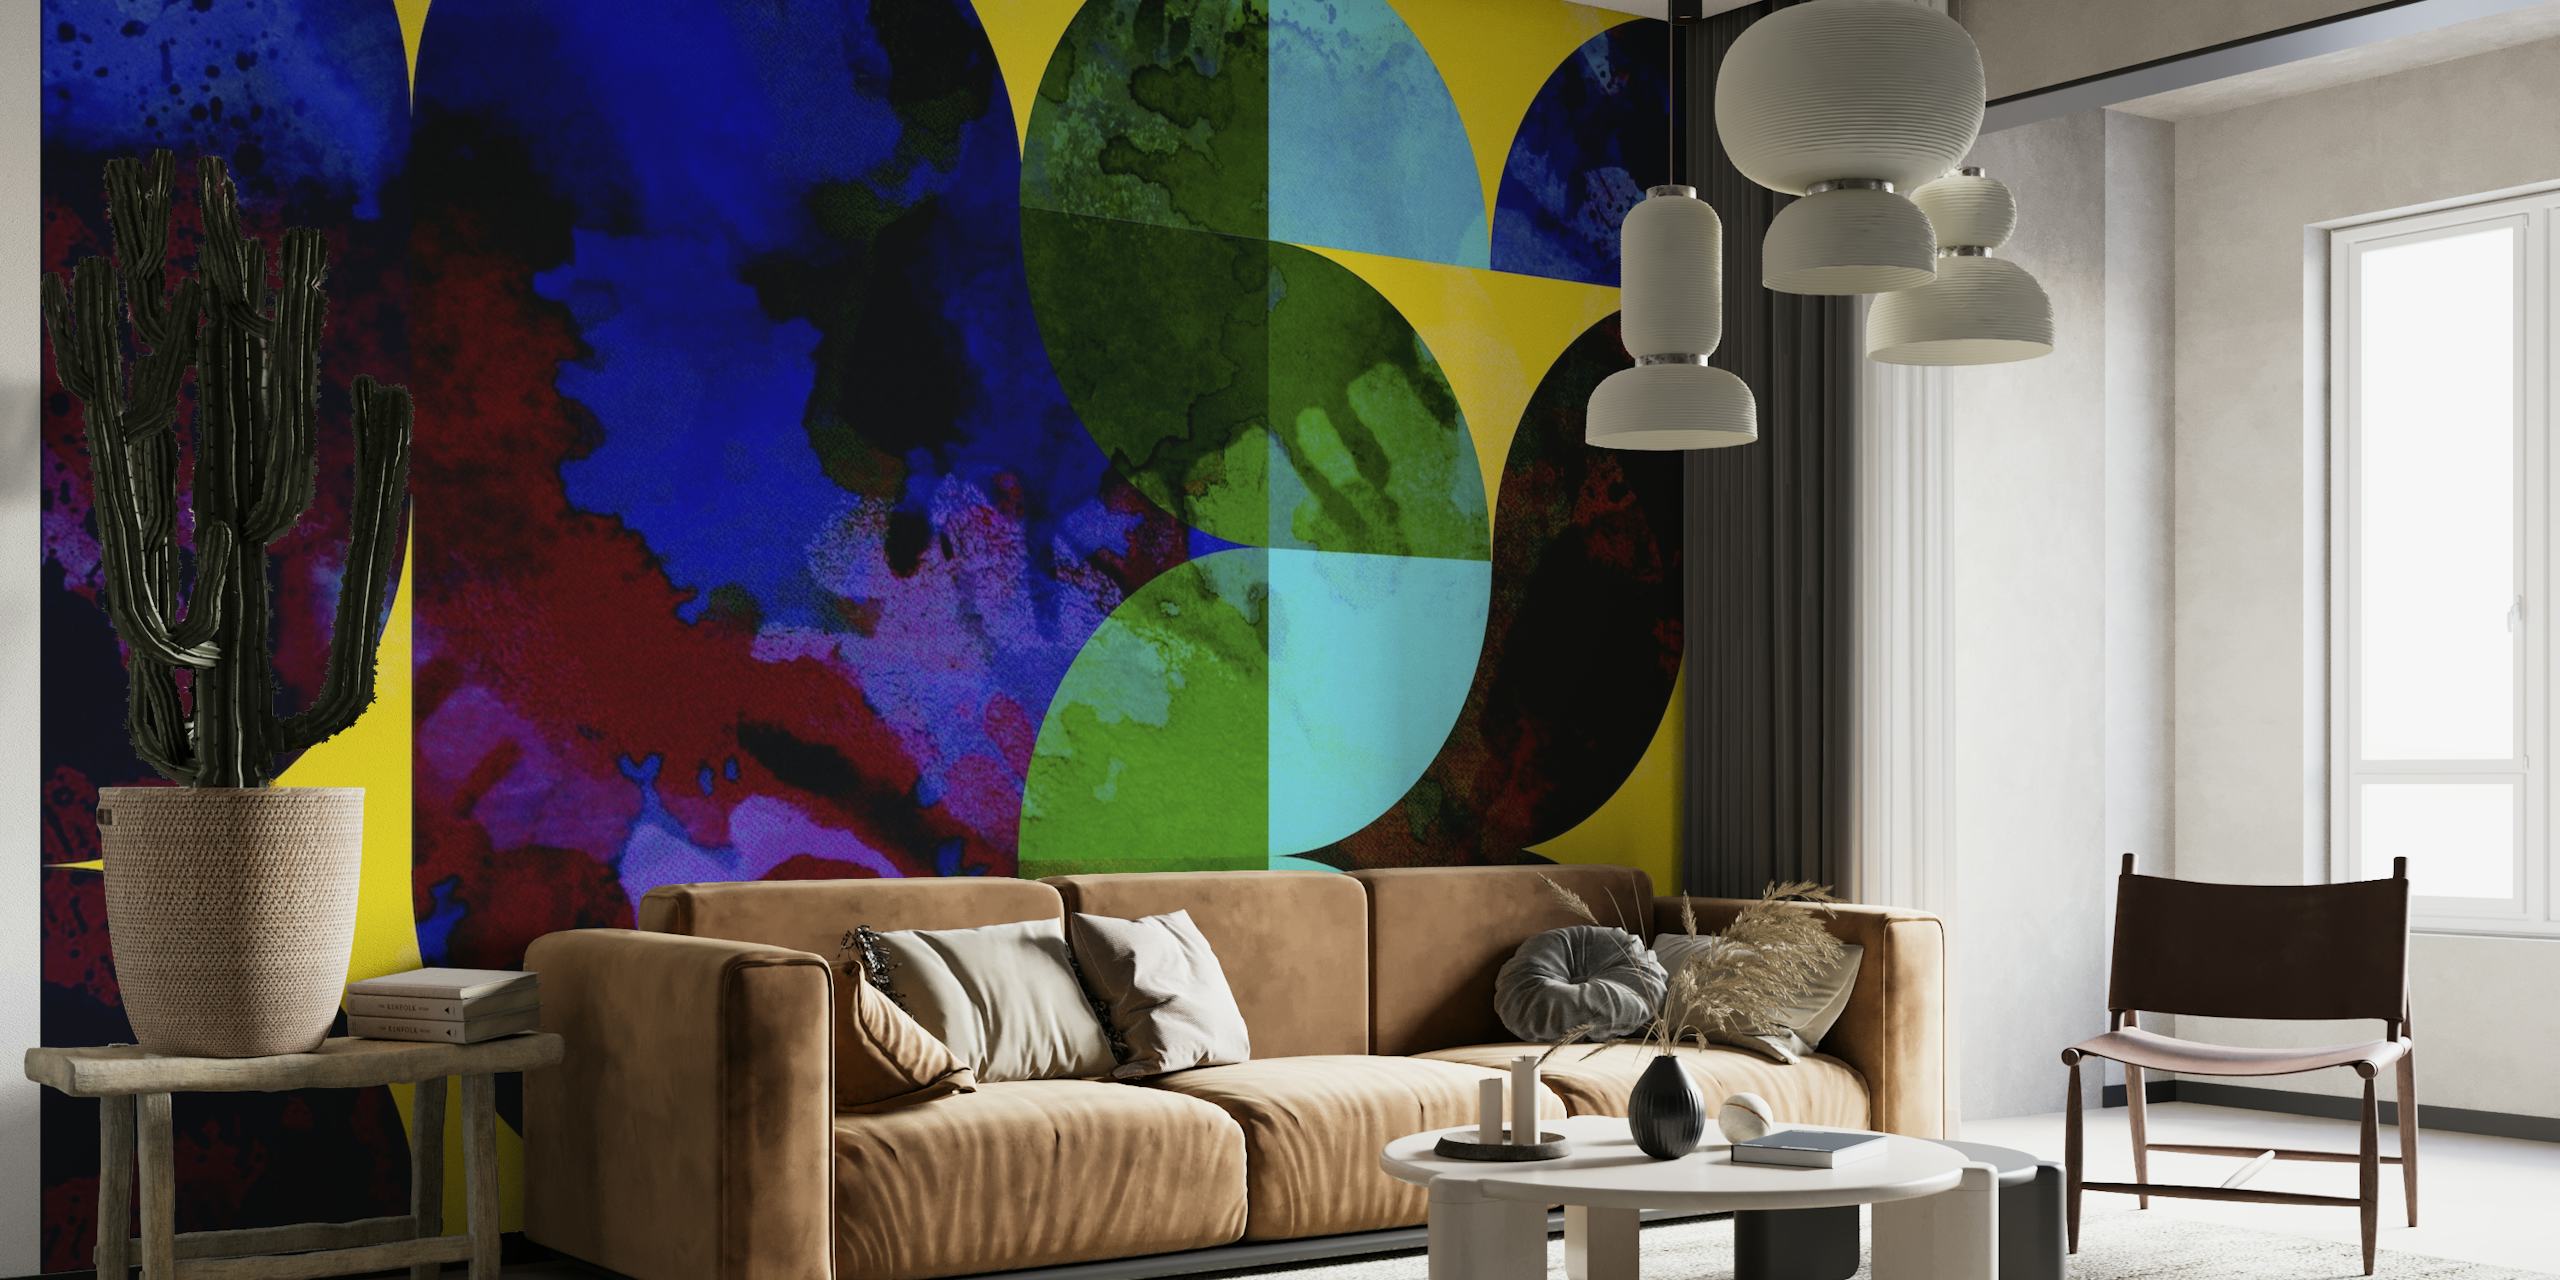 Abstract mid-century modern stained glass mosaic wall mural in vivid colors